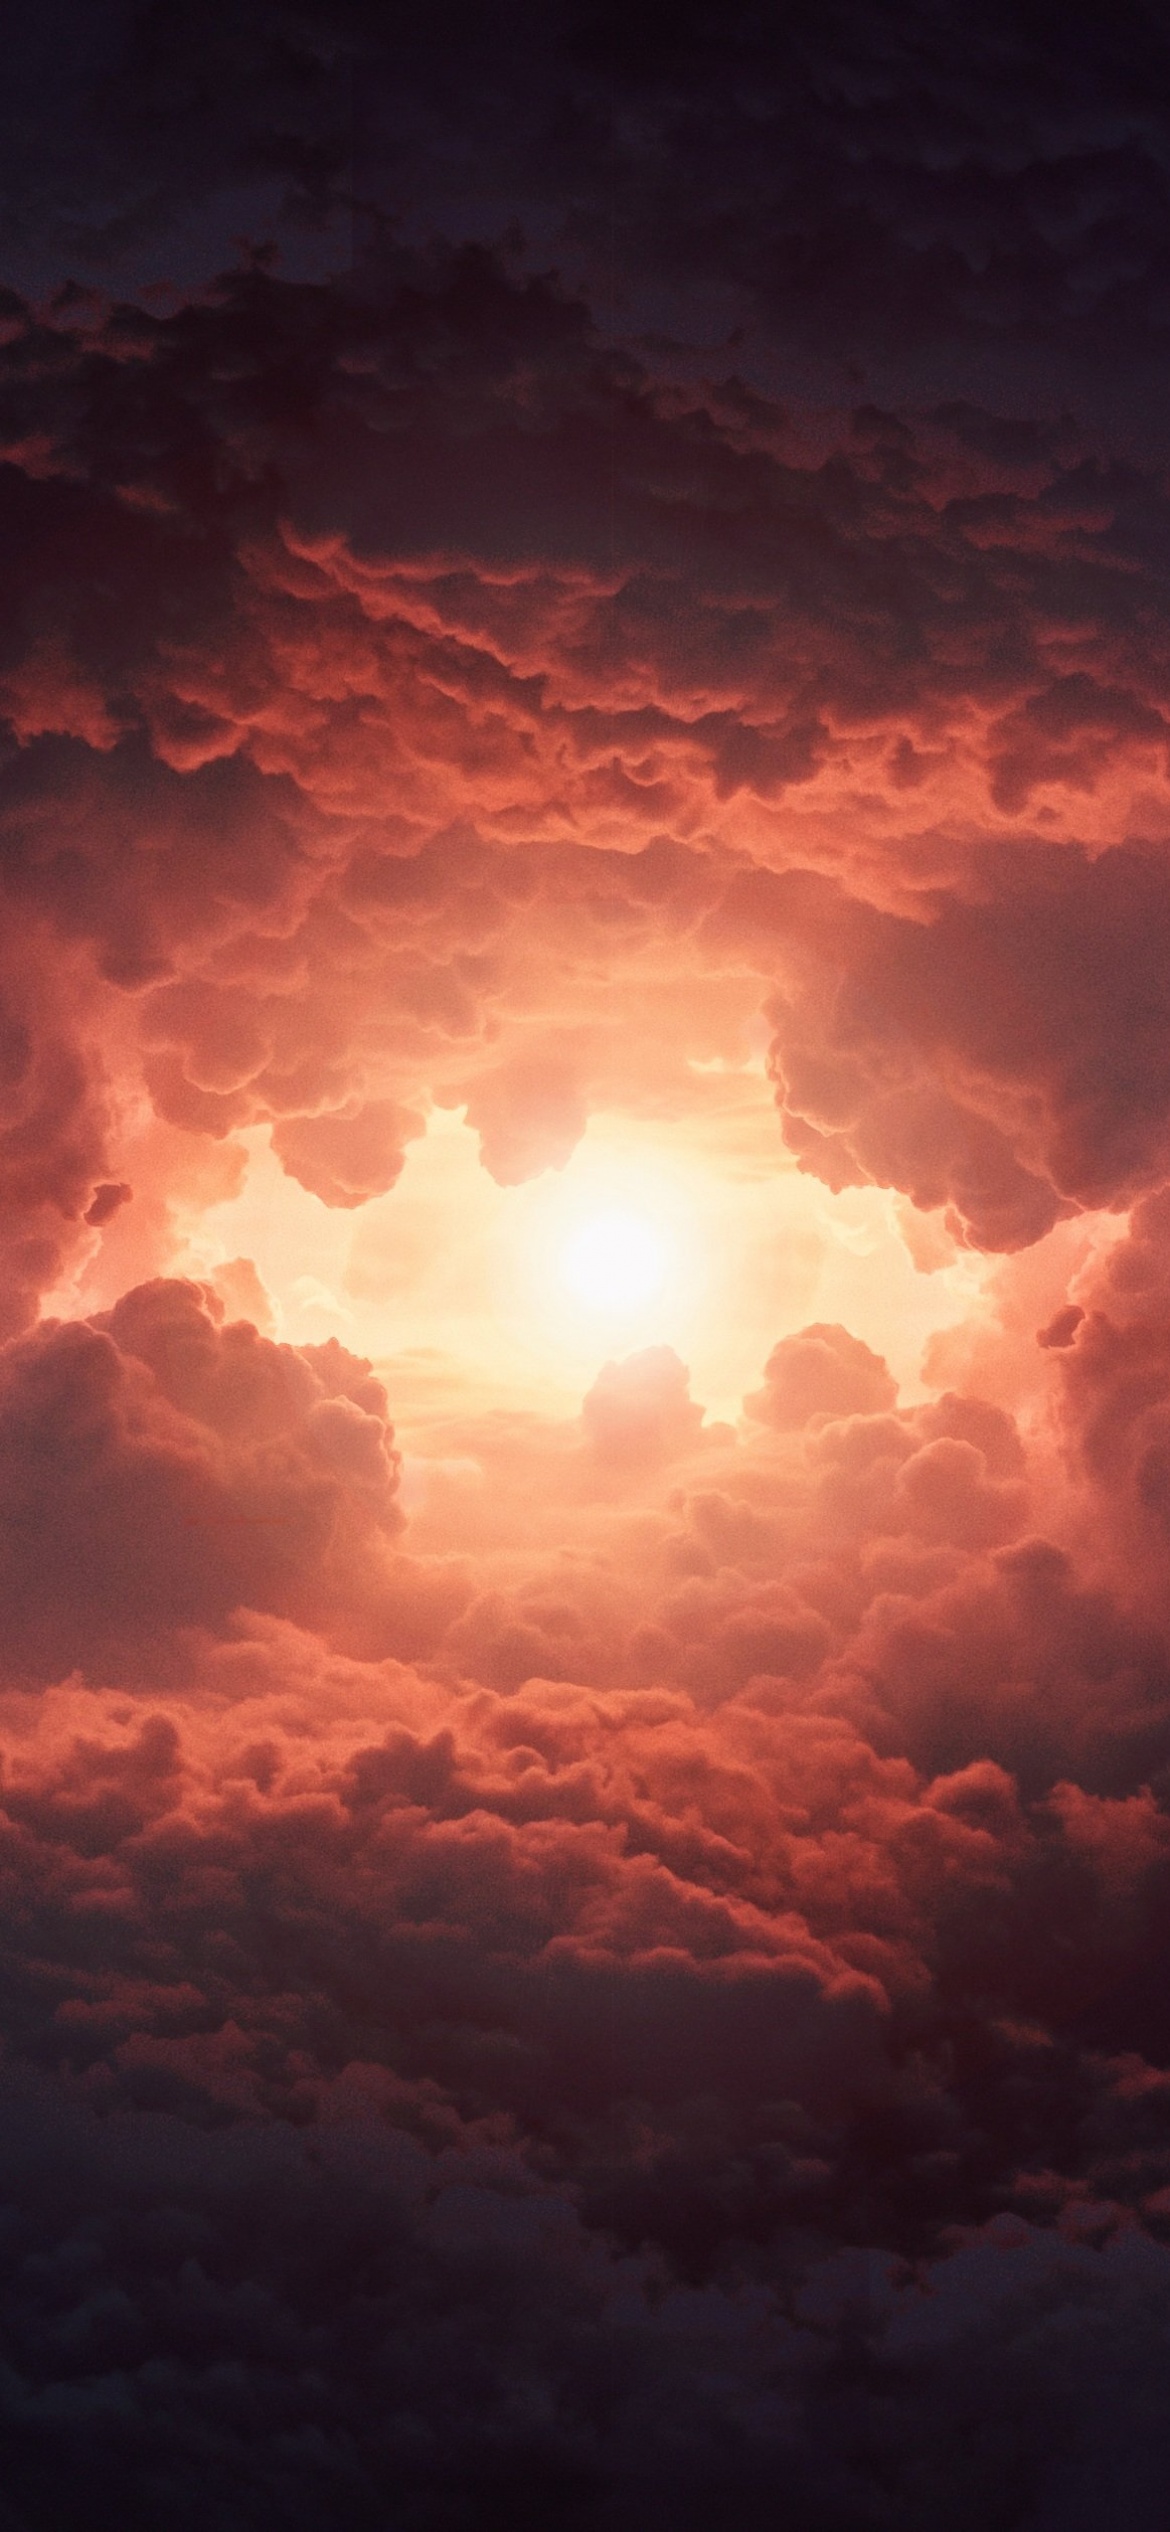 Abstract view created from colorful clouds 4K wallpaper download